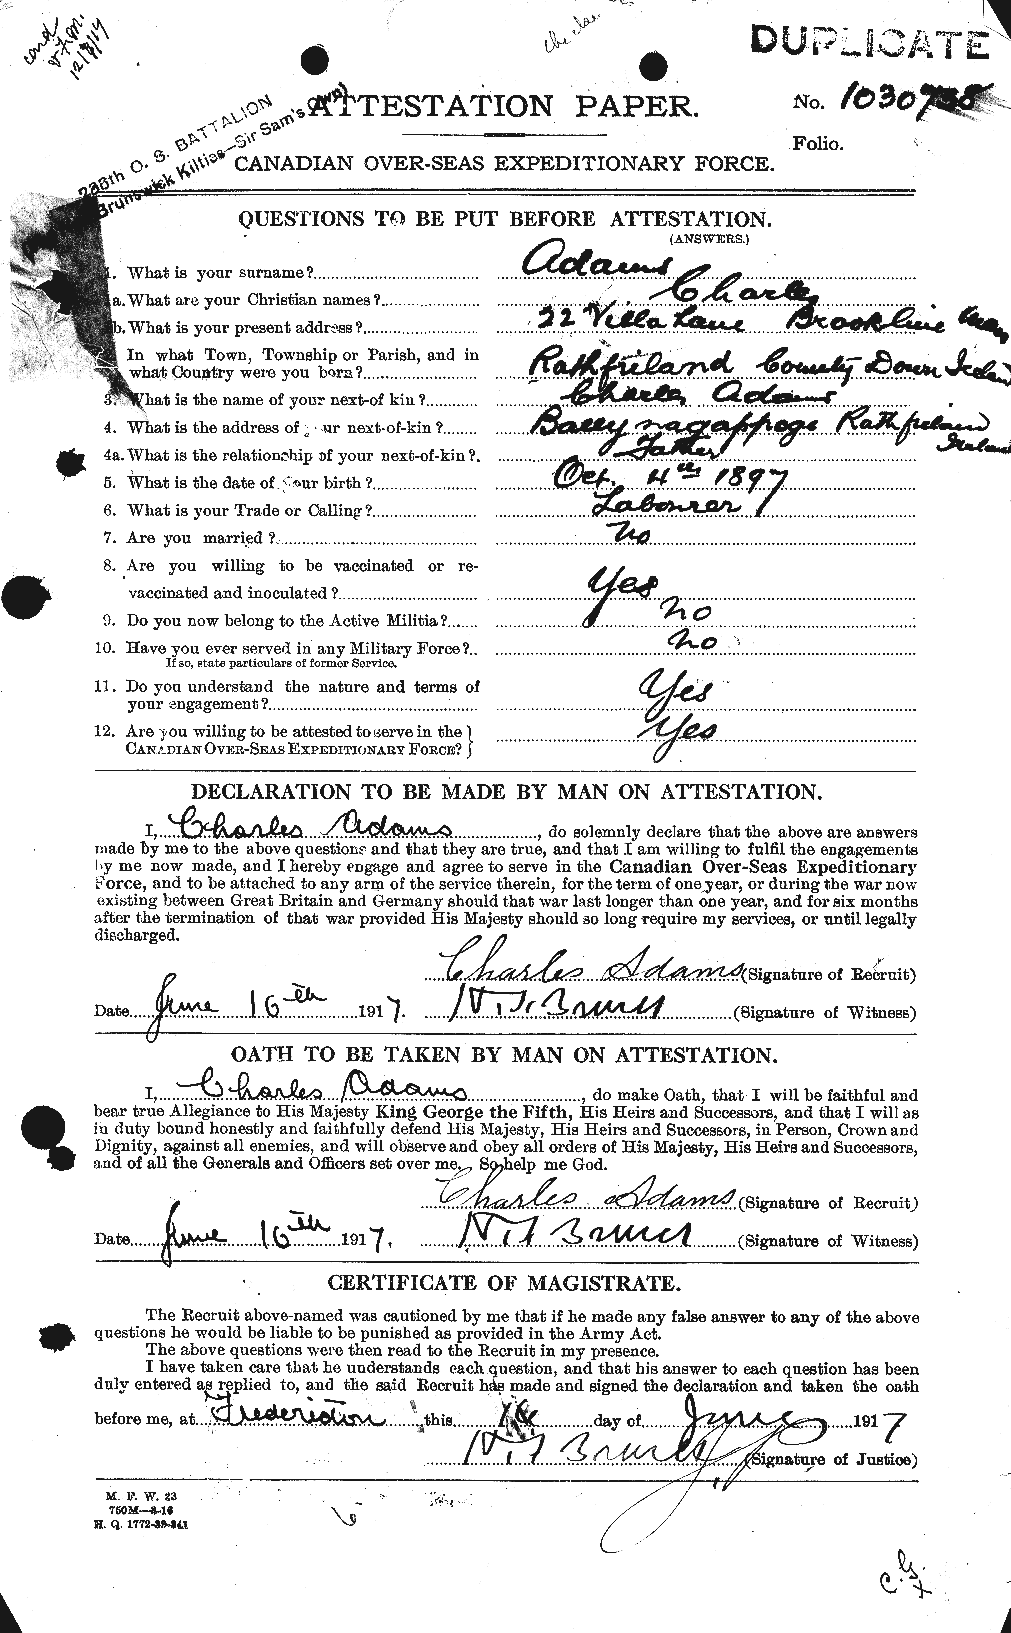 Personnel Records of the First World War - CEF 202054a